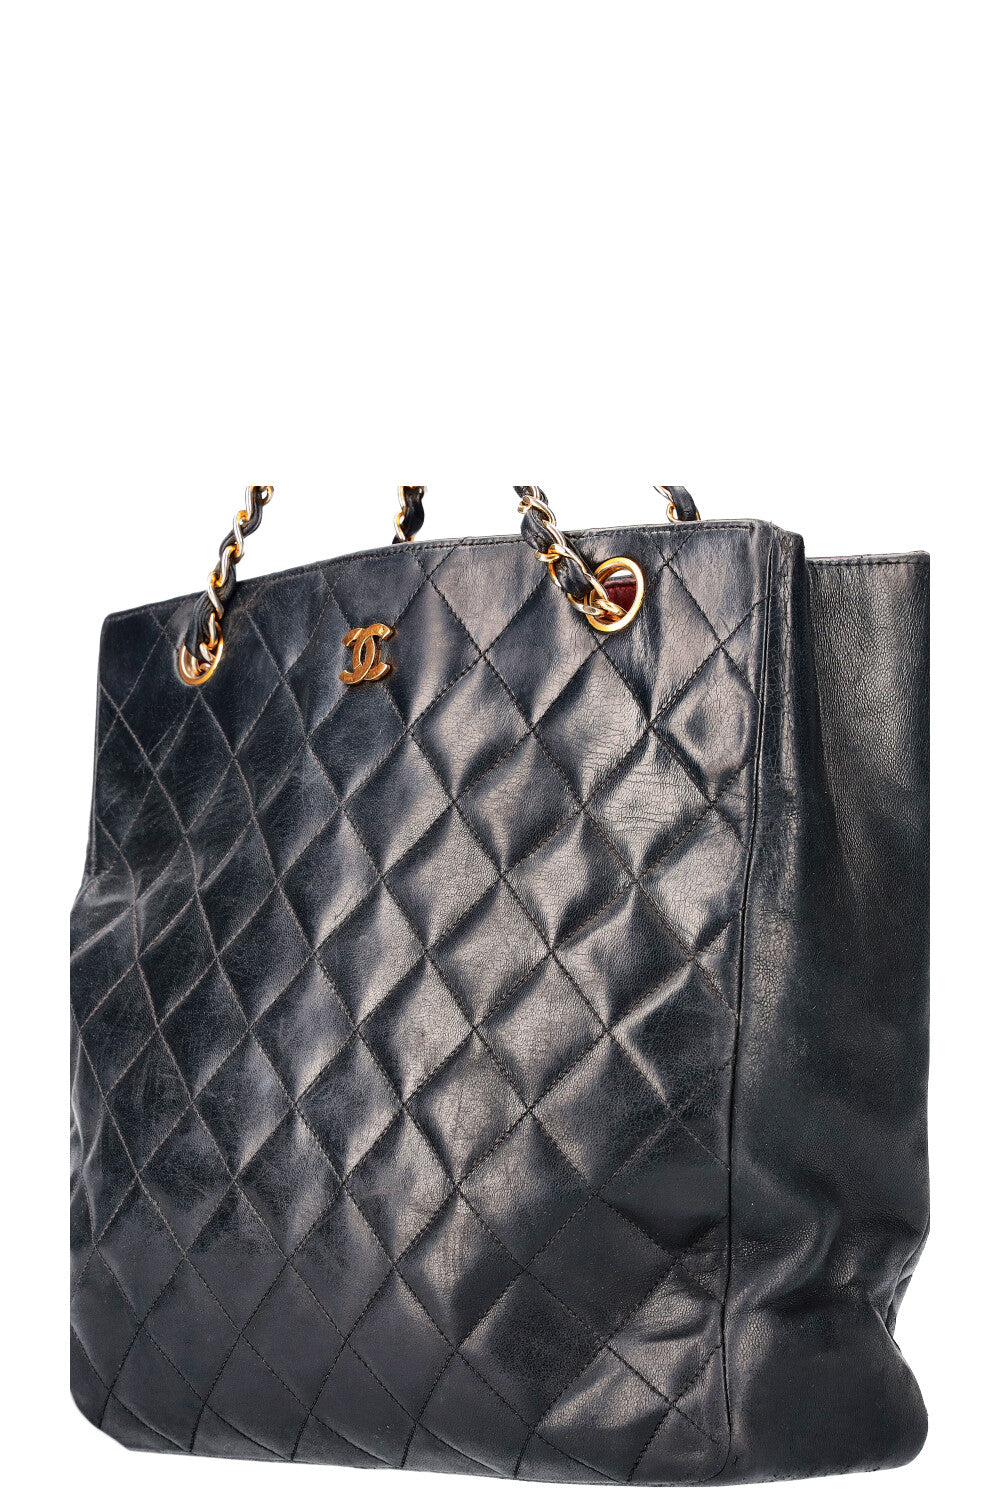 CHANEL Vintage Quilted Shopper 1986-88